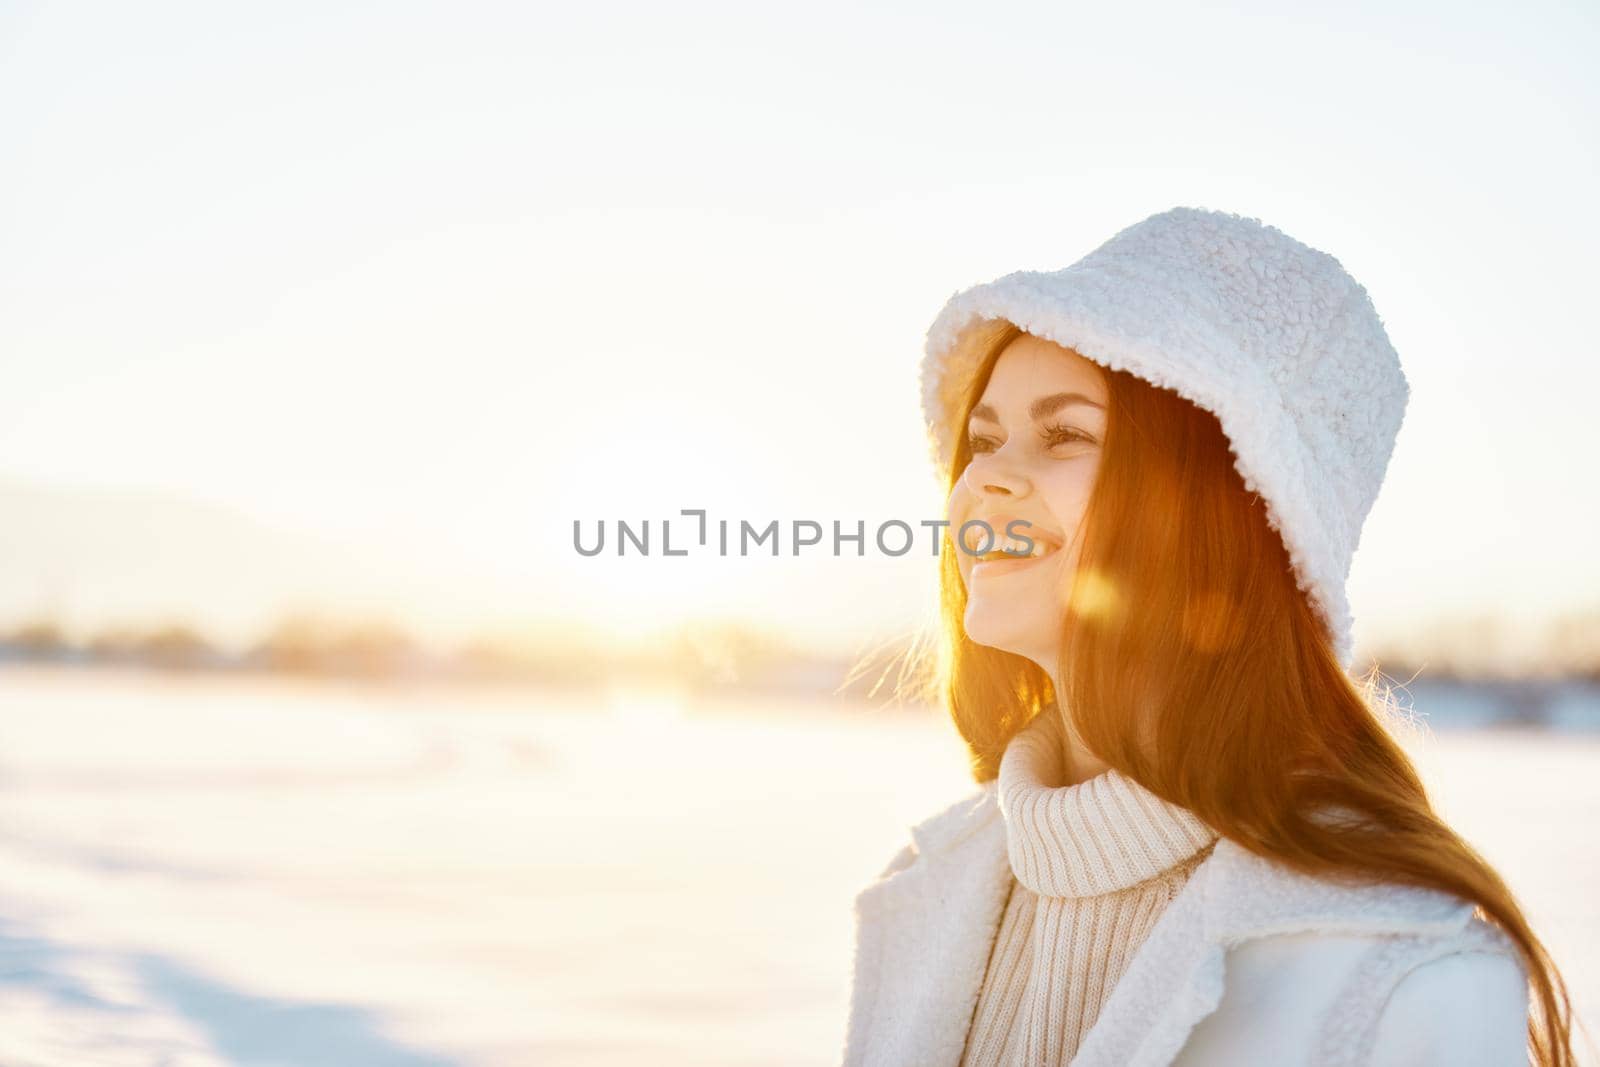 young woman red hair snow field winter clothes Sunny winter day Fresh air. High quality photo